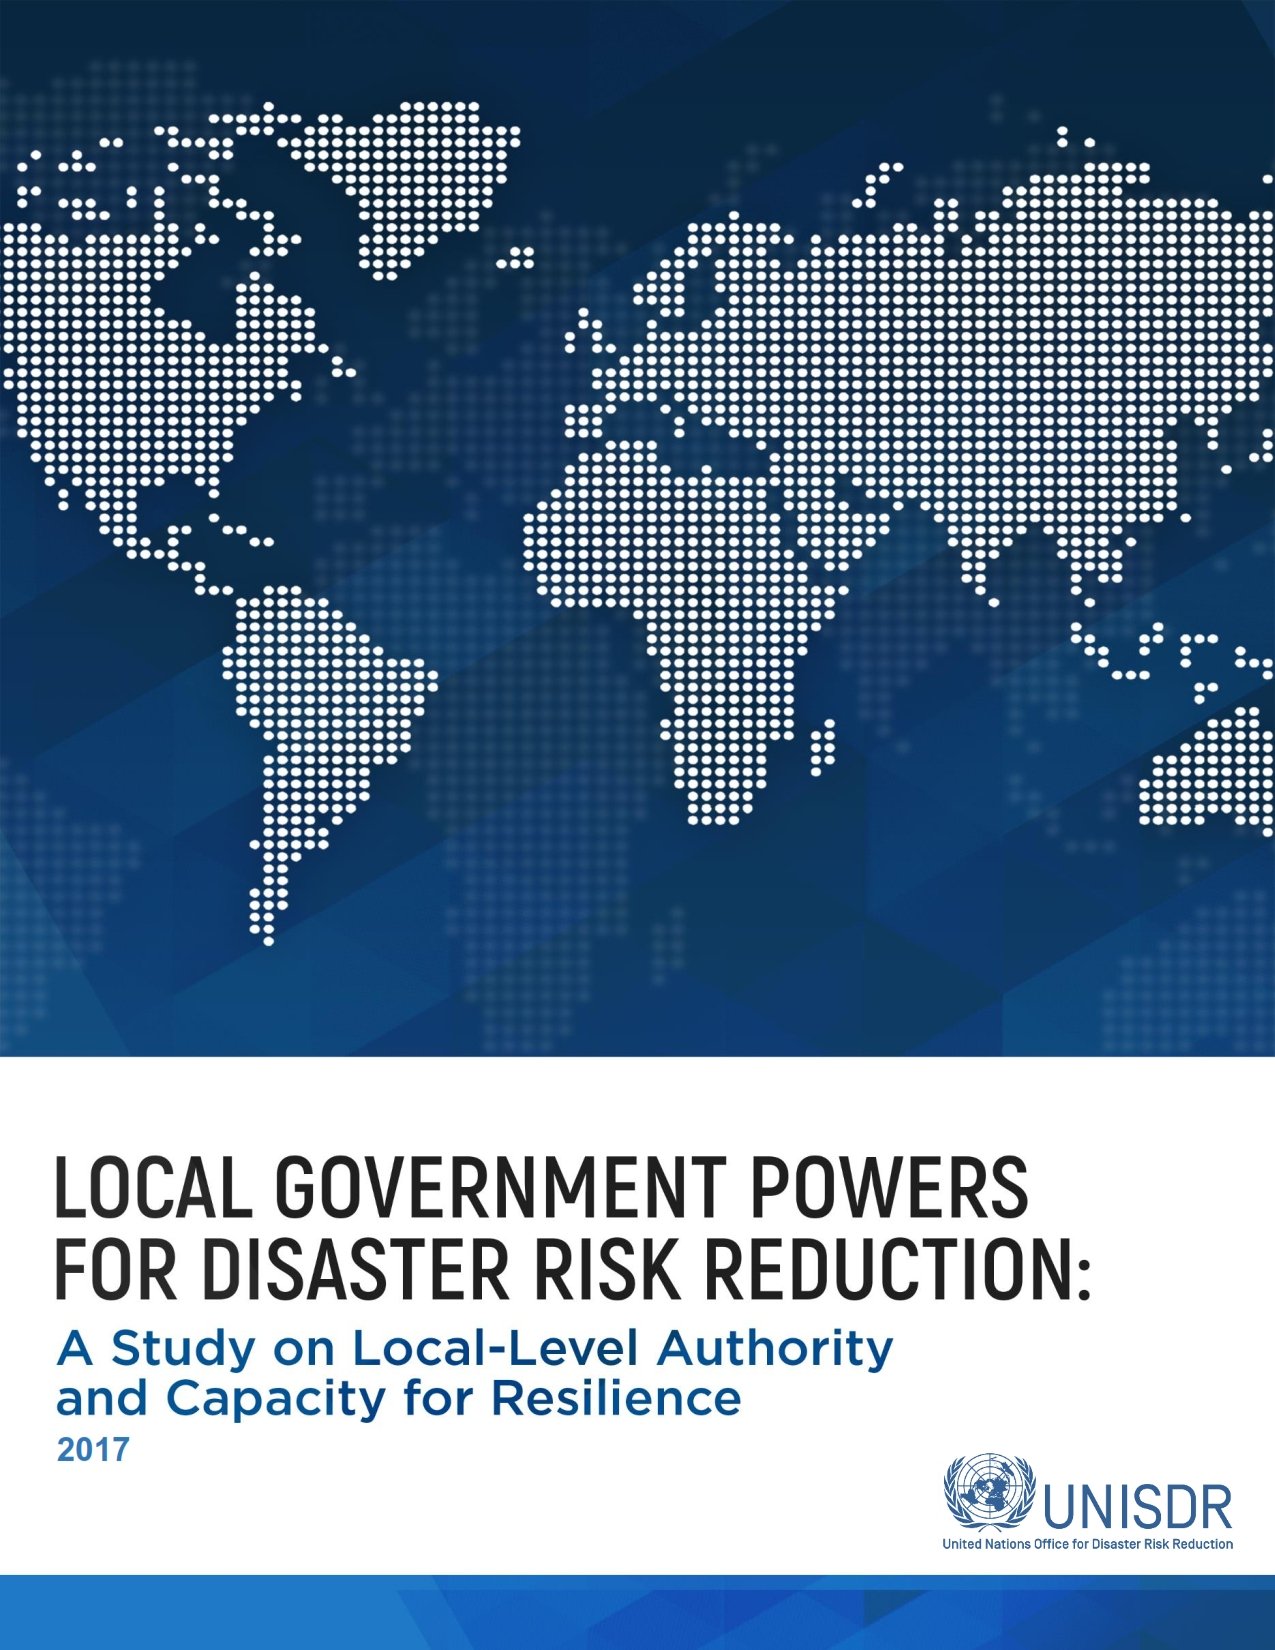 Local Government Powers for Disaster Risk Reduction: A new report by UNISDR and CUDRR+R is finalized